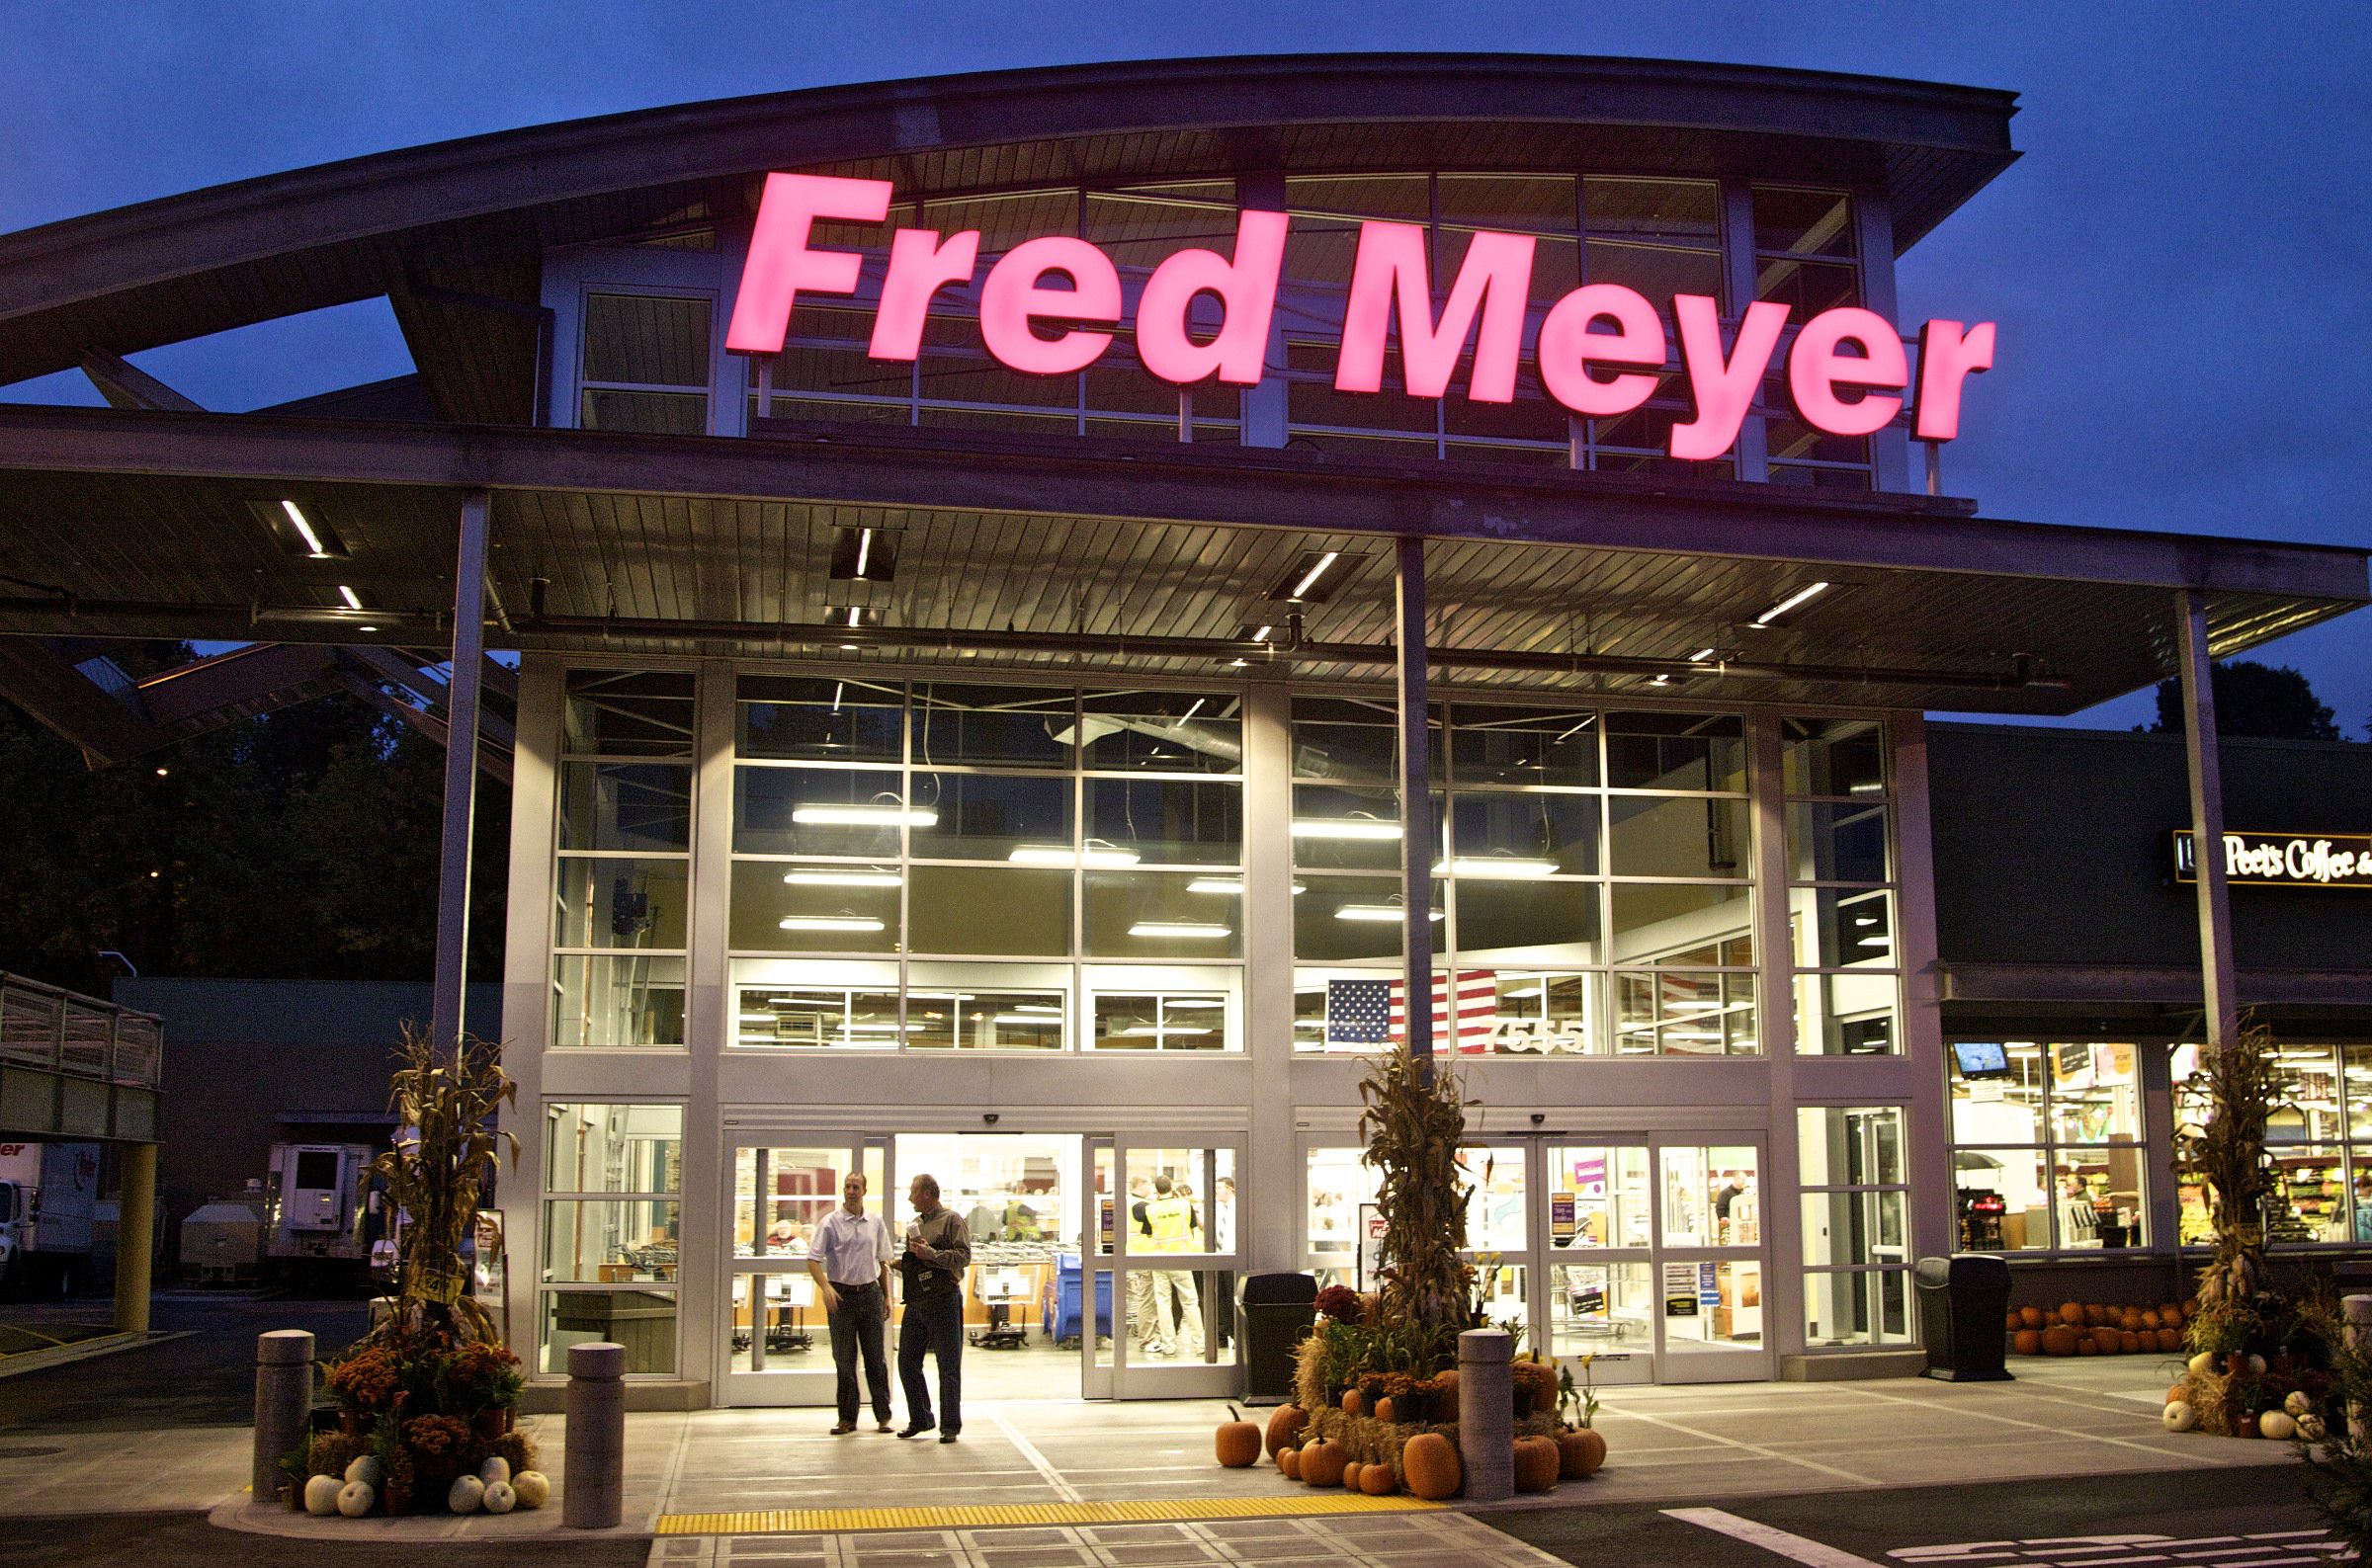 Upcoming Fred Meyer union vote marks culmination of recent